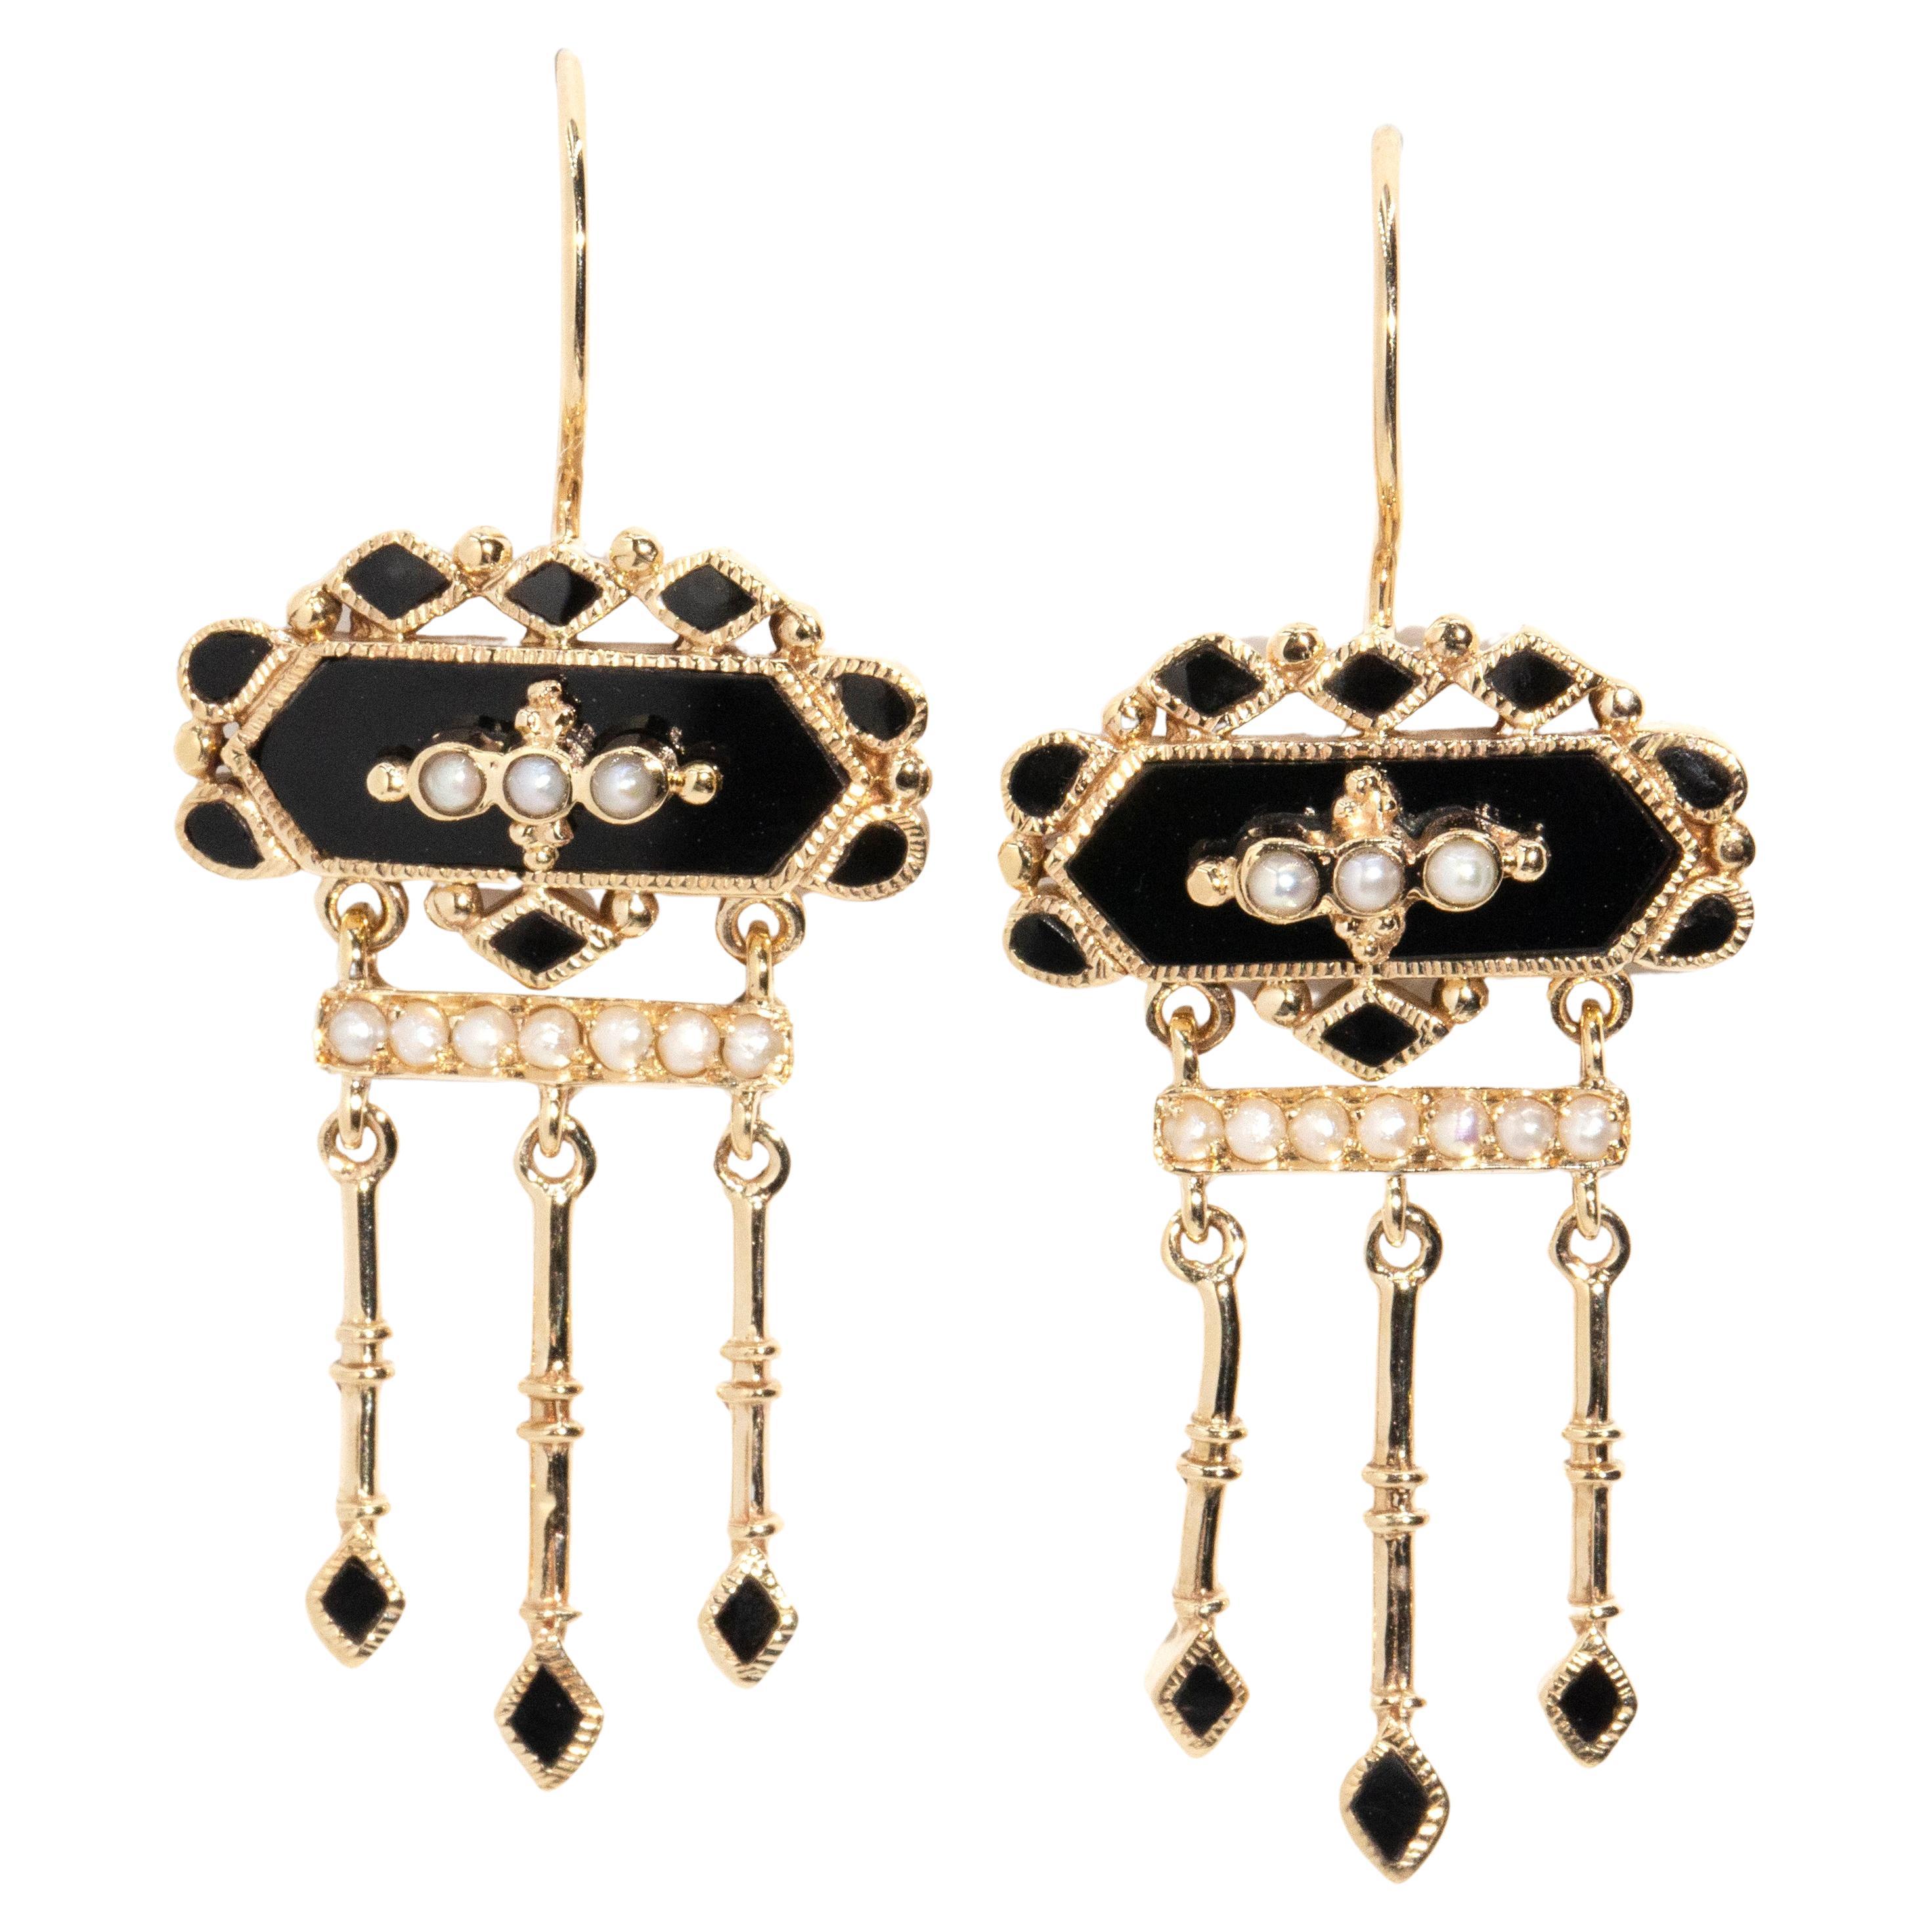 Vintage Inspired Onyx & Seed Pearl Drop Style Earrings 9 Carat Yellow Gold